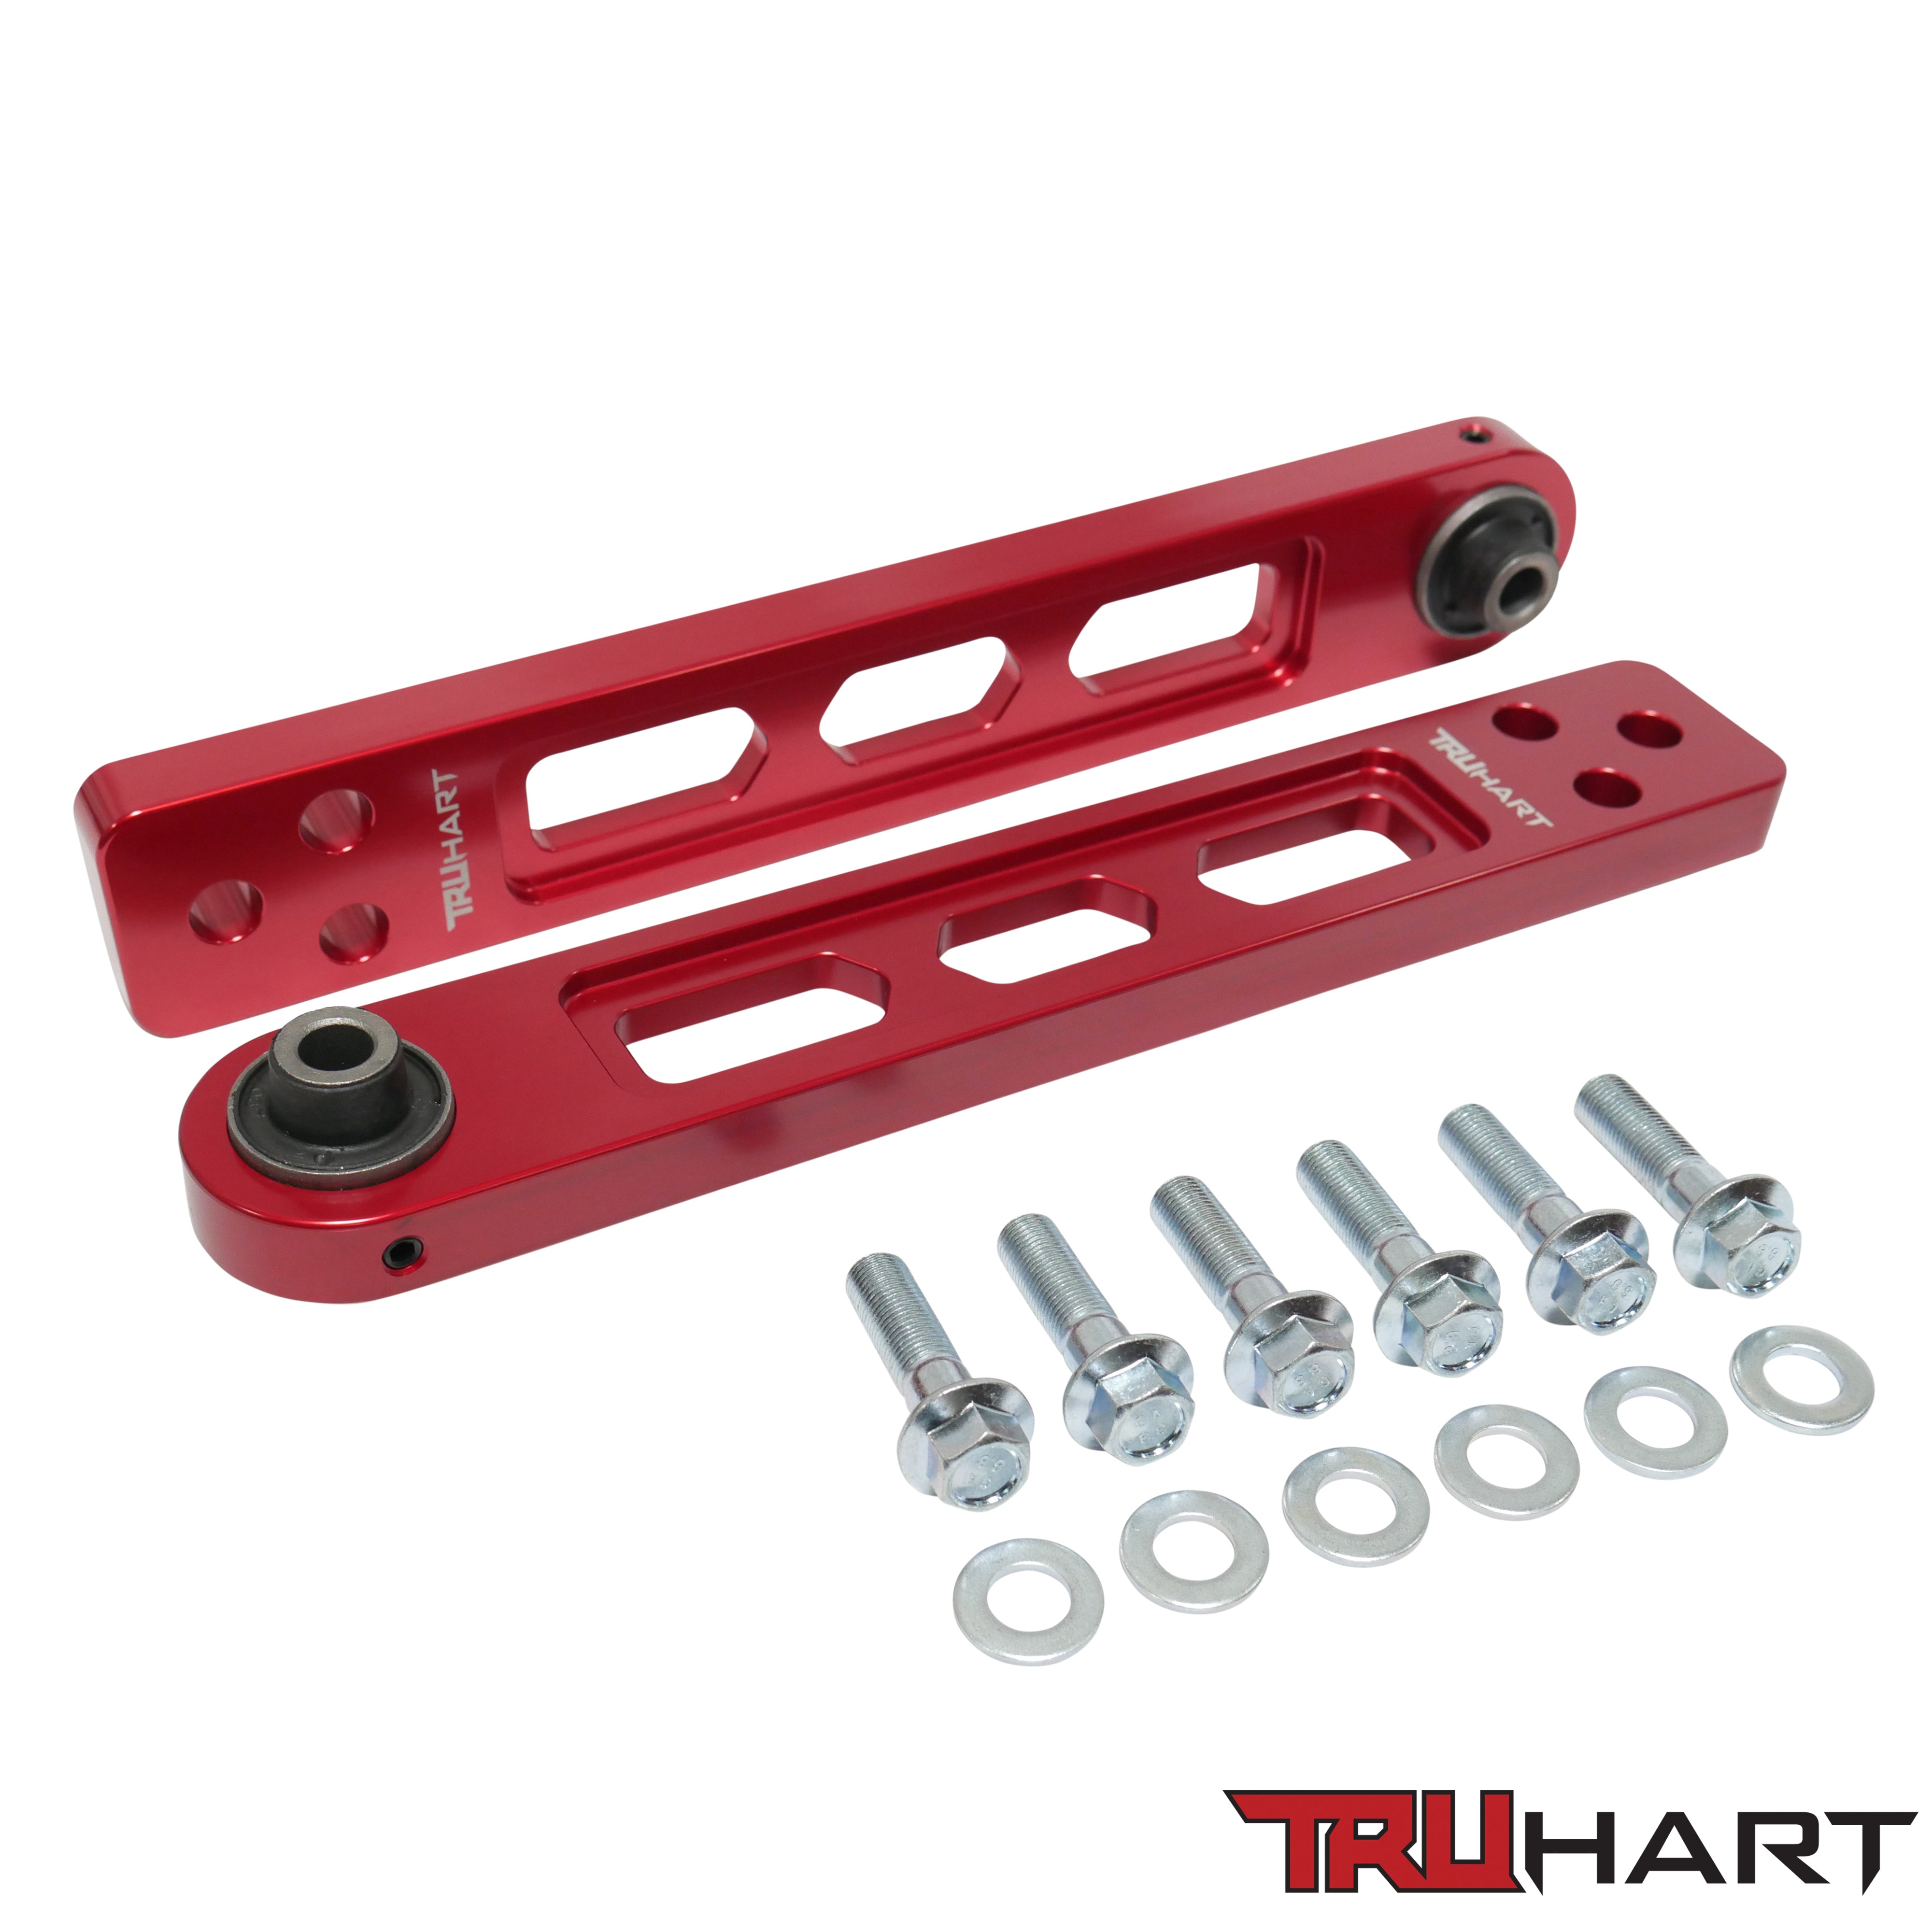 TruHart - Rear Lower Control Arms - Anodized Red - TH-H103-1-RE - NextGen Tuning